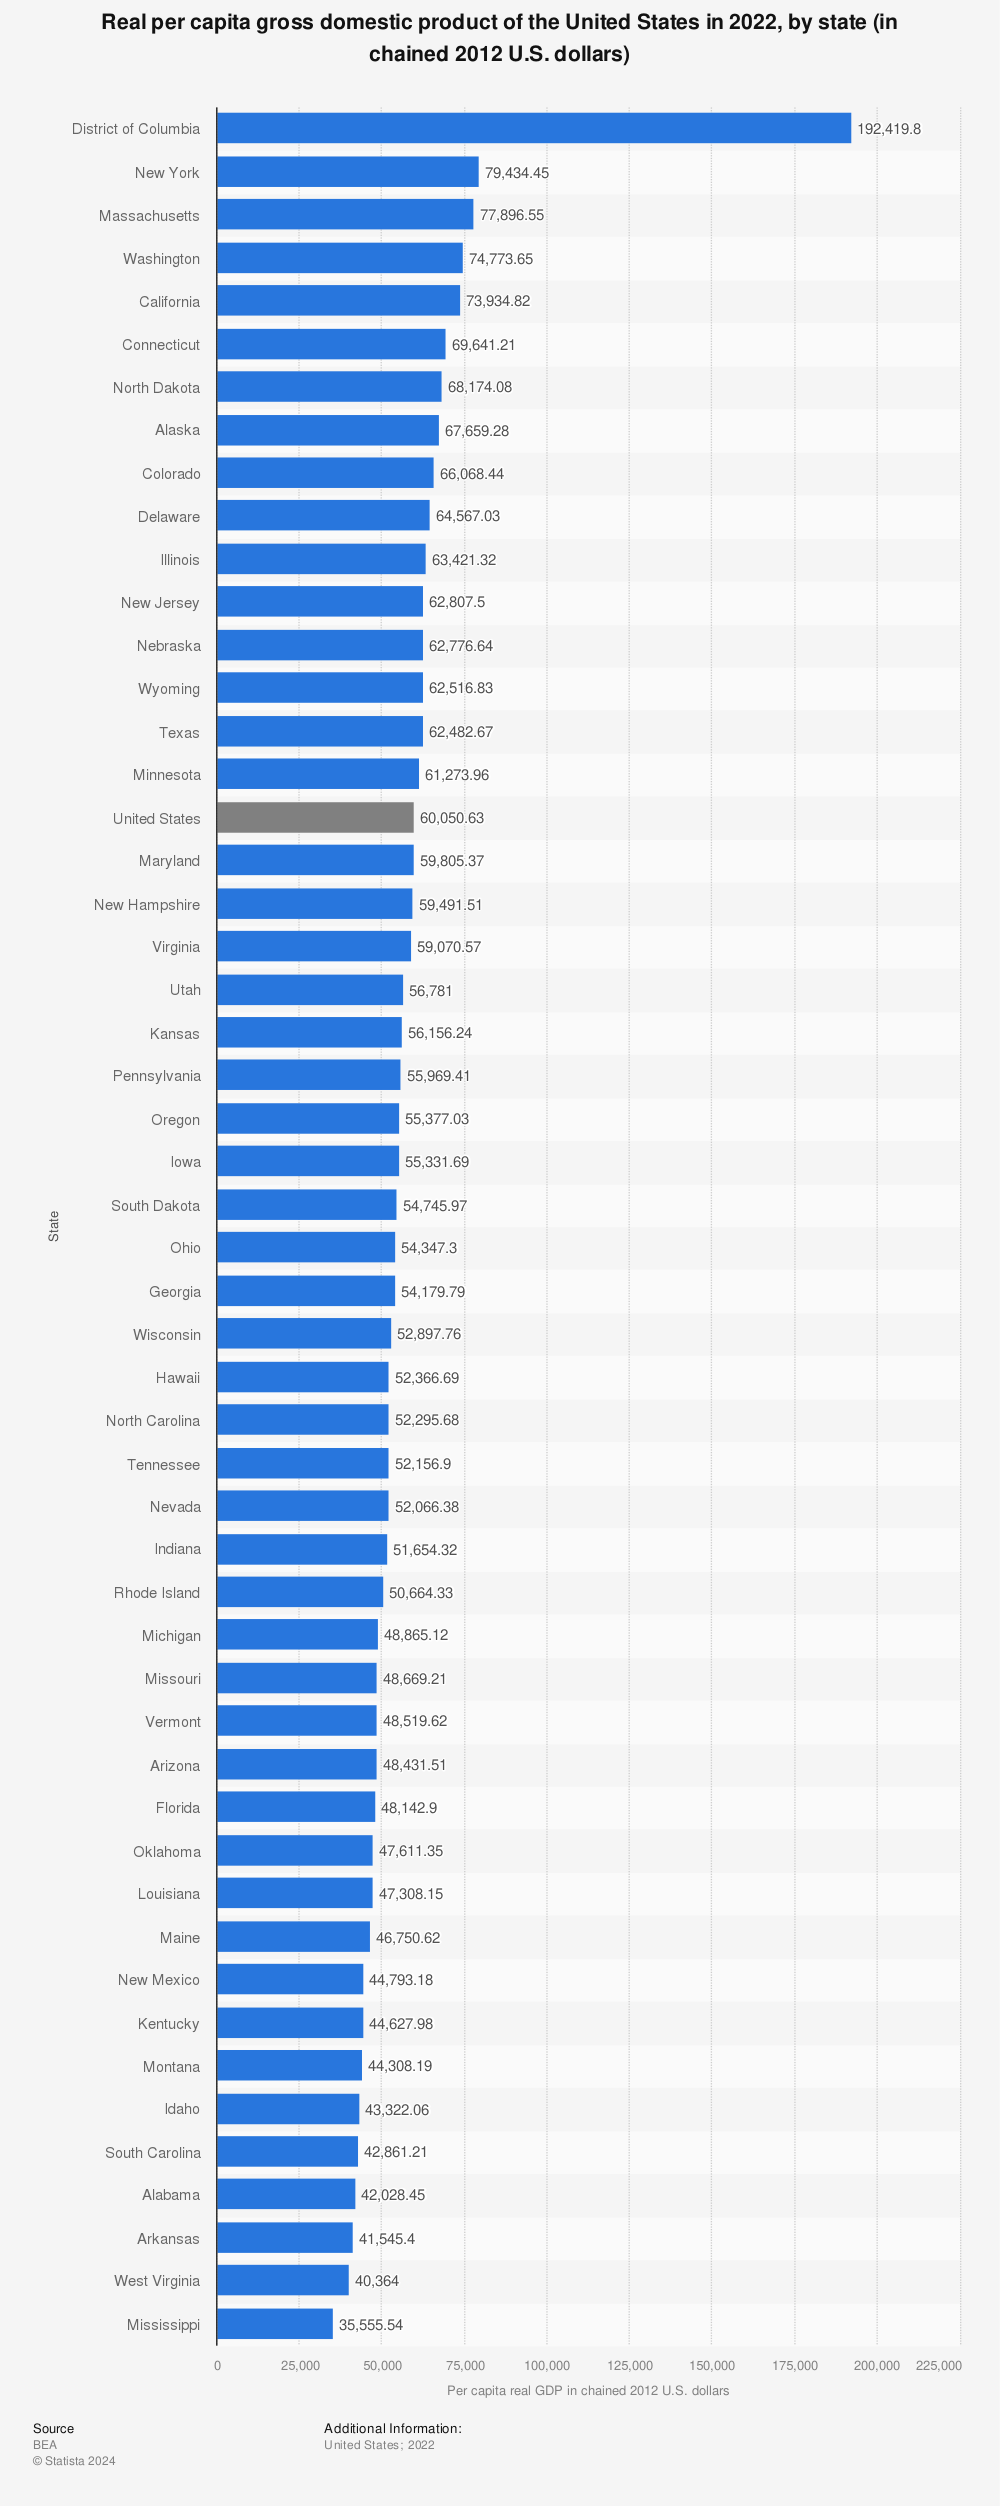 Statistic: Per capita Real Gross Domestic Product (GDP) of the United States in 2019, by state (in chained 2012 U.S. dollars) | Statista